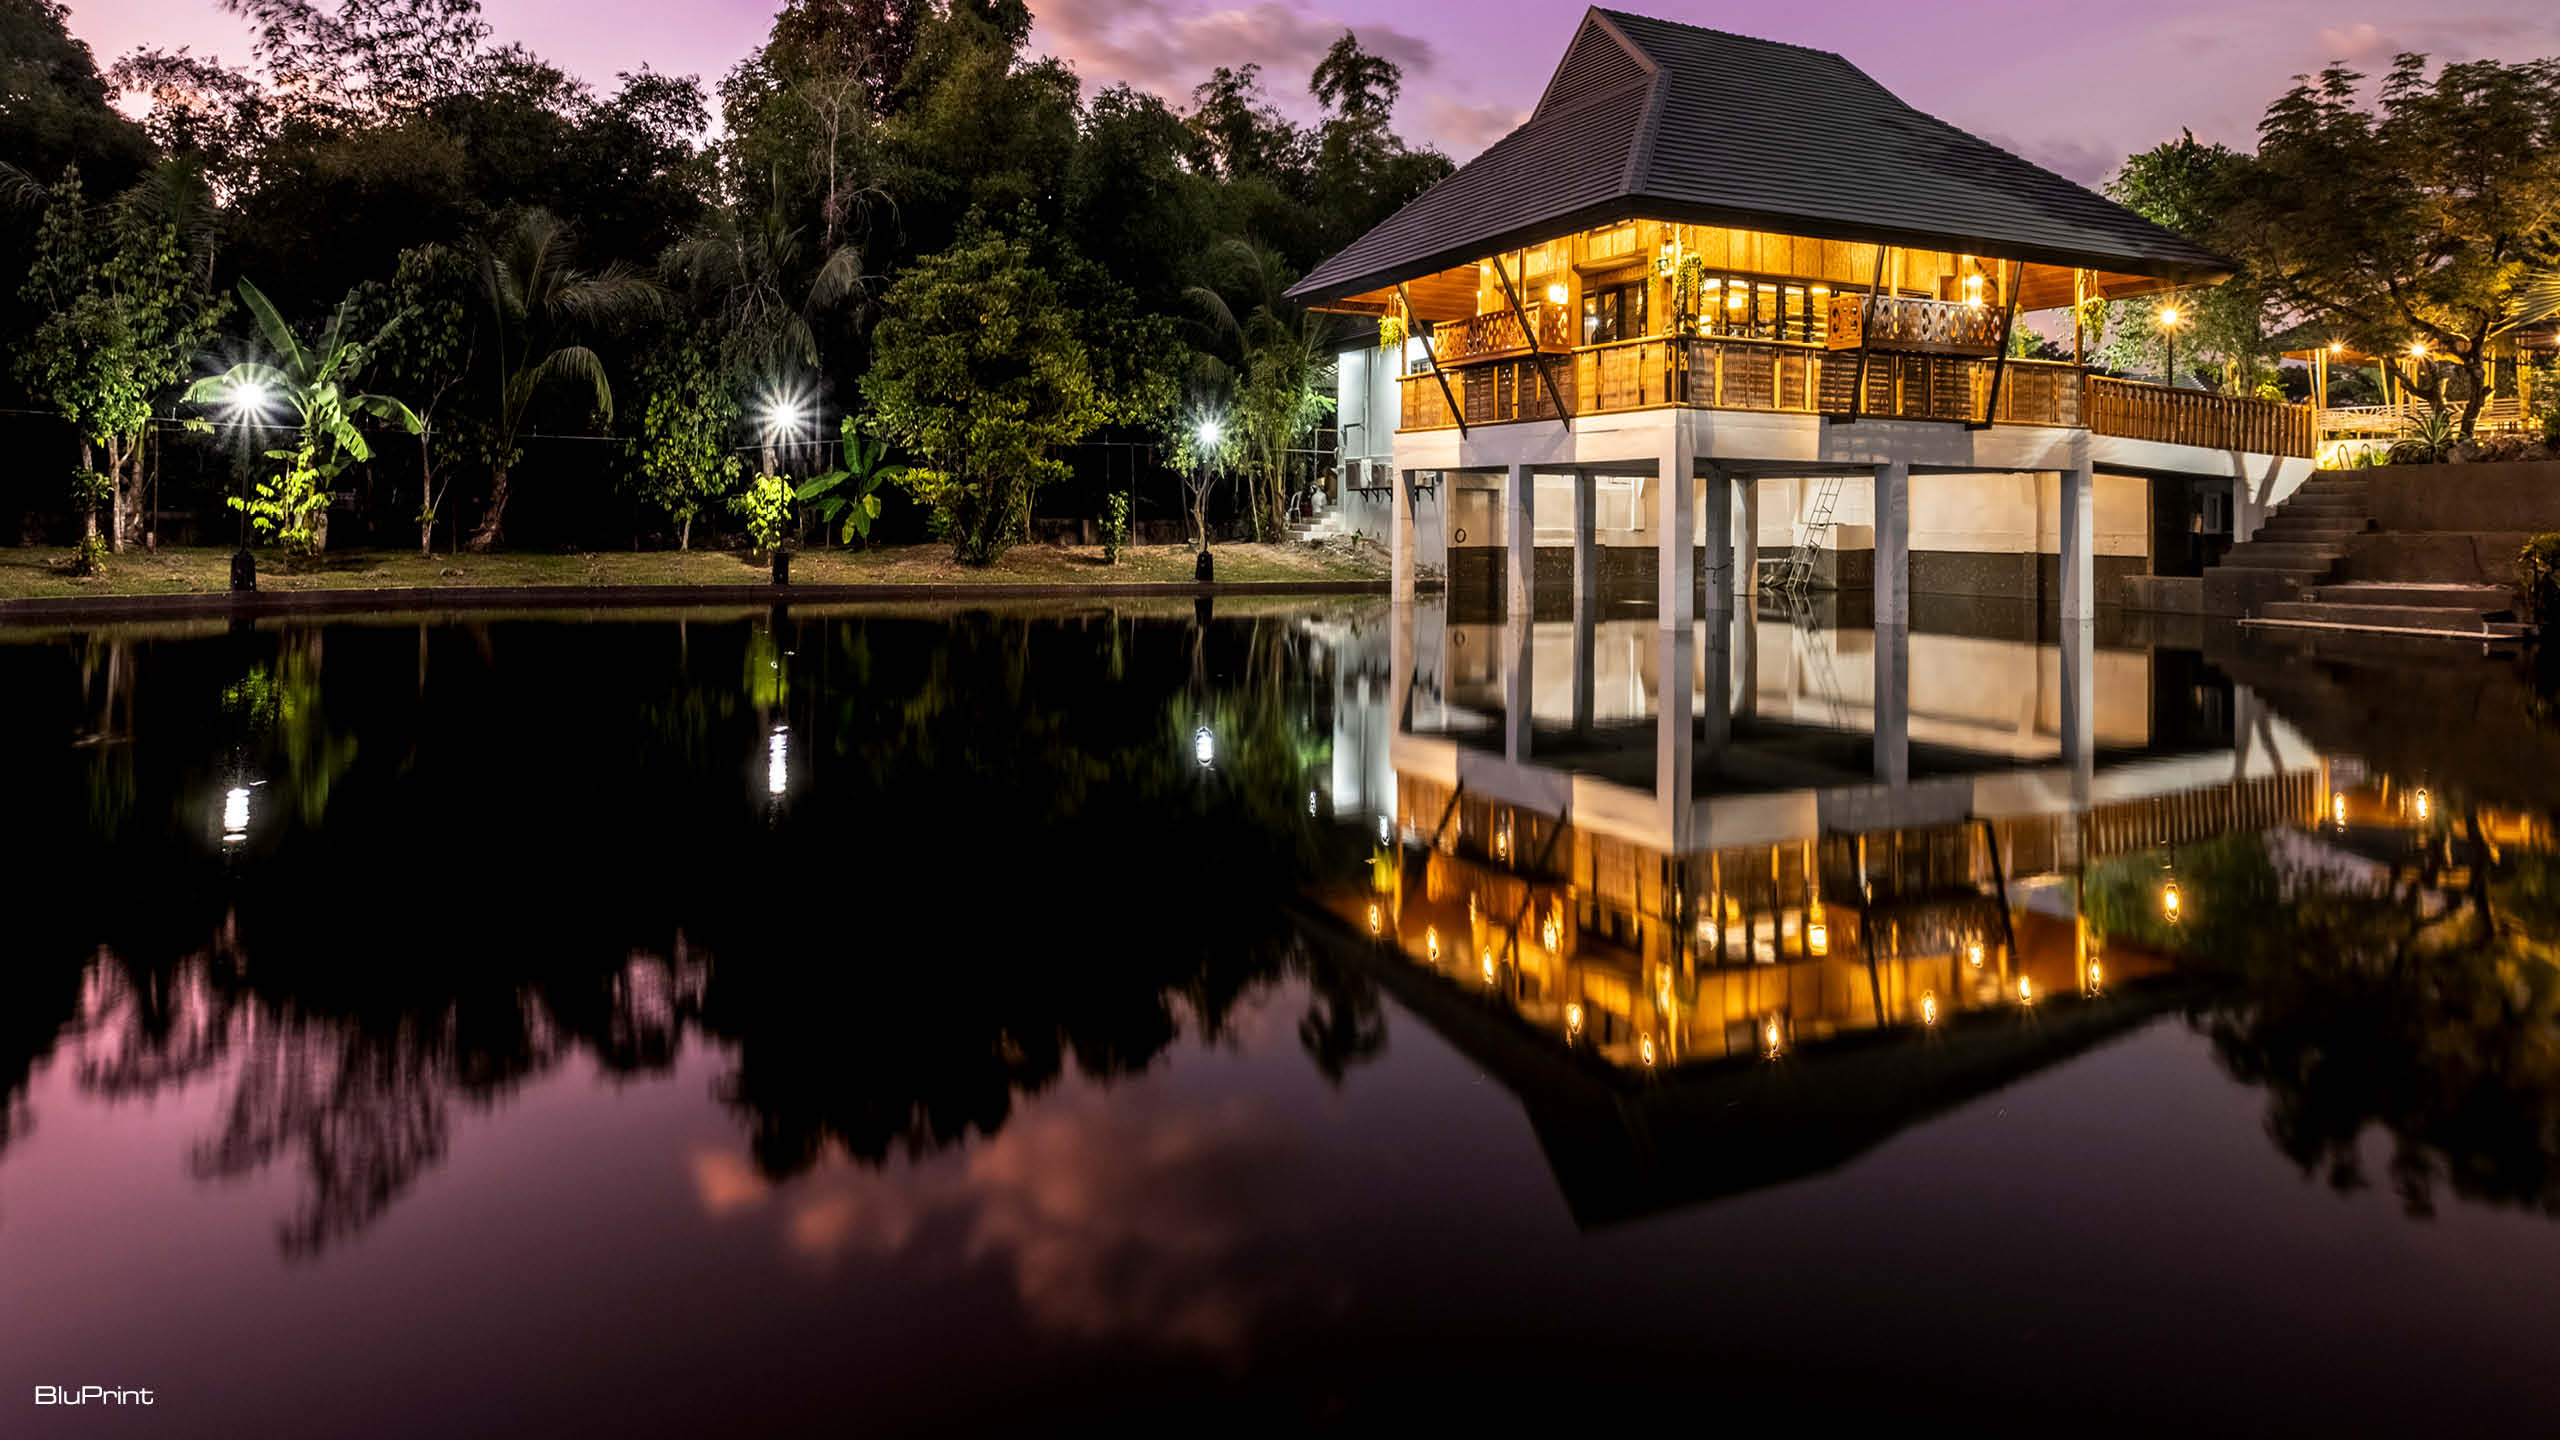 A night time shot of a modern bahay kubo lit up from inside, the lights reflecting on the small lake it sits in.